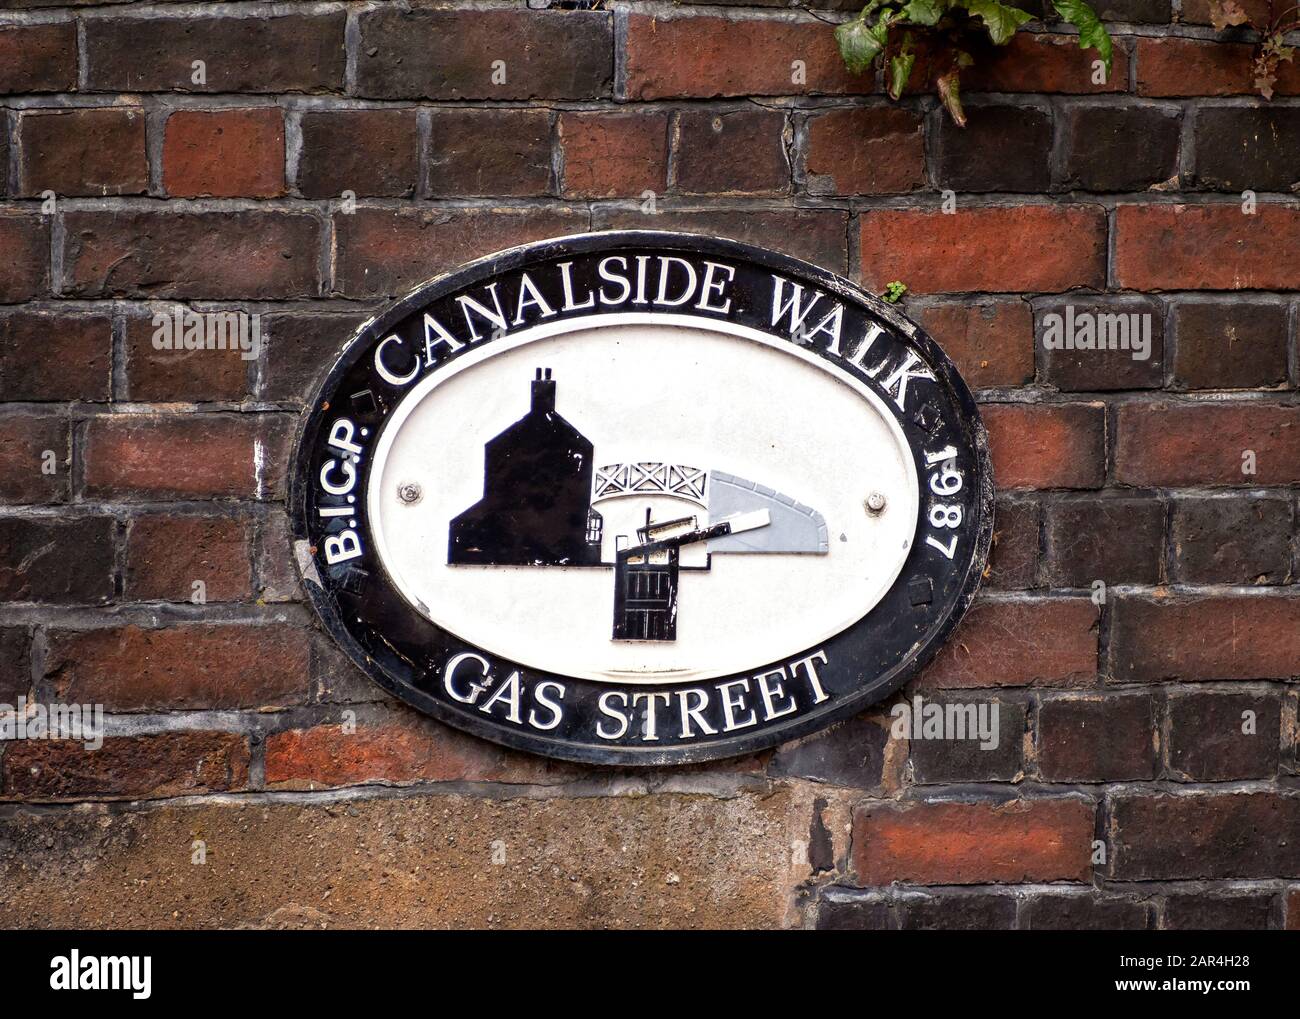 BIRMINGHAM, UK - MAY 28, 2019:  Old sign on a brick for canalside walk at Gas Street, Brindley Place Stock Photo